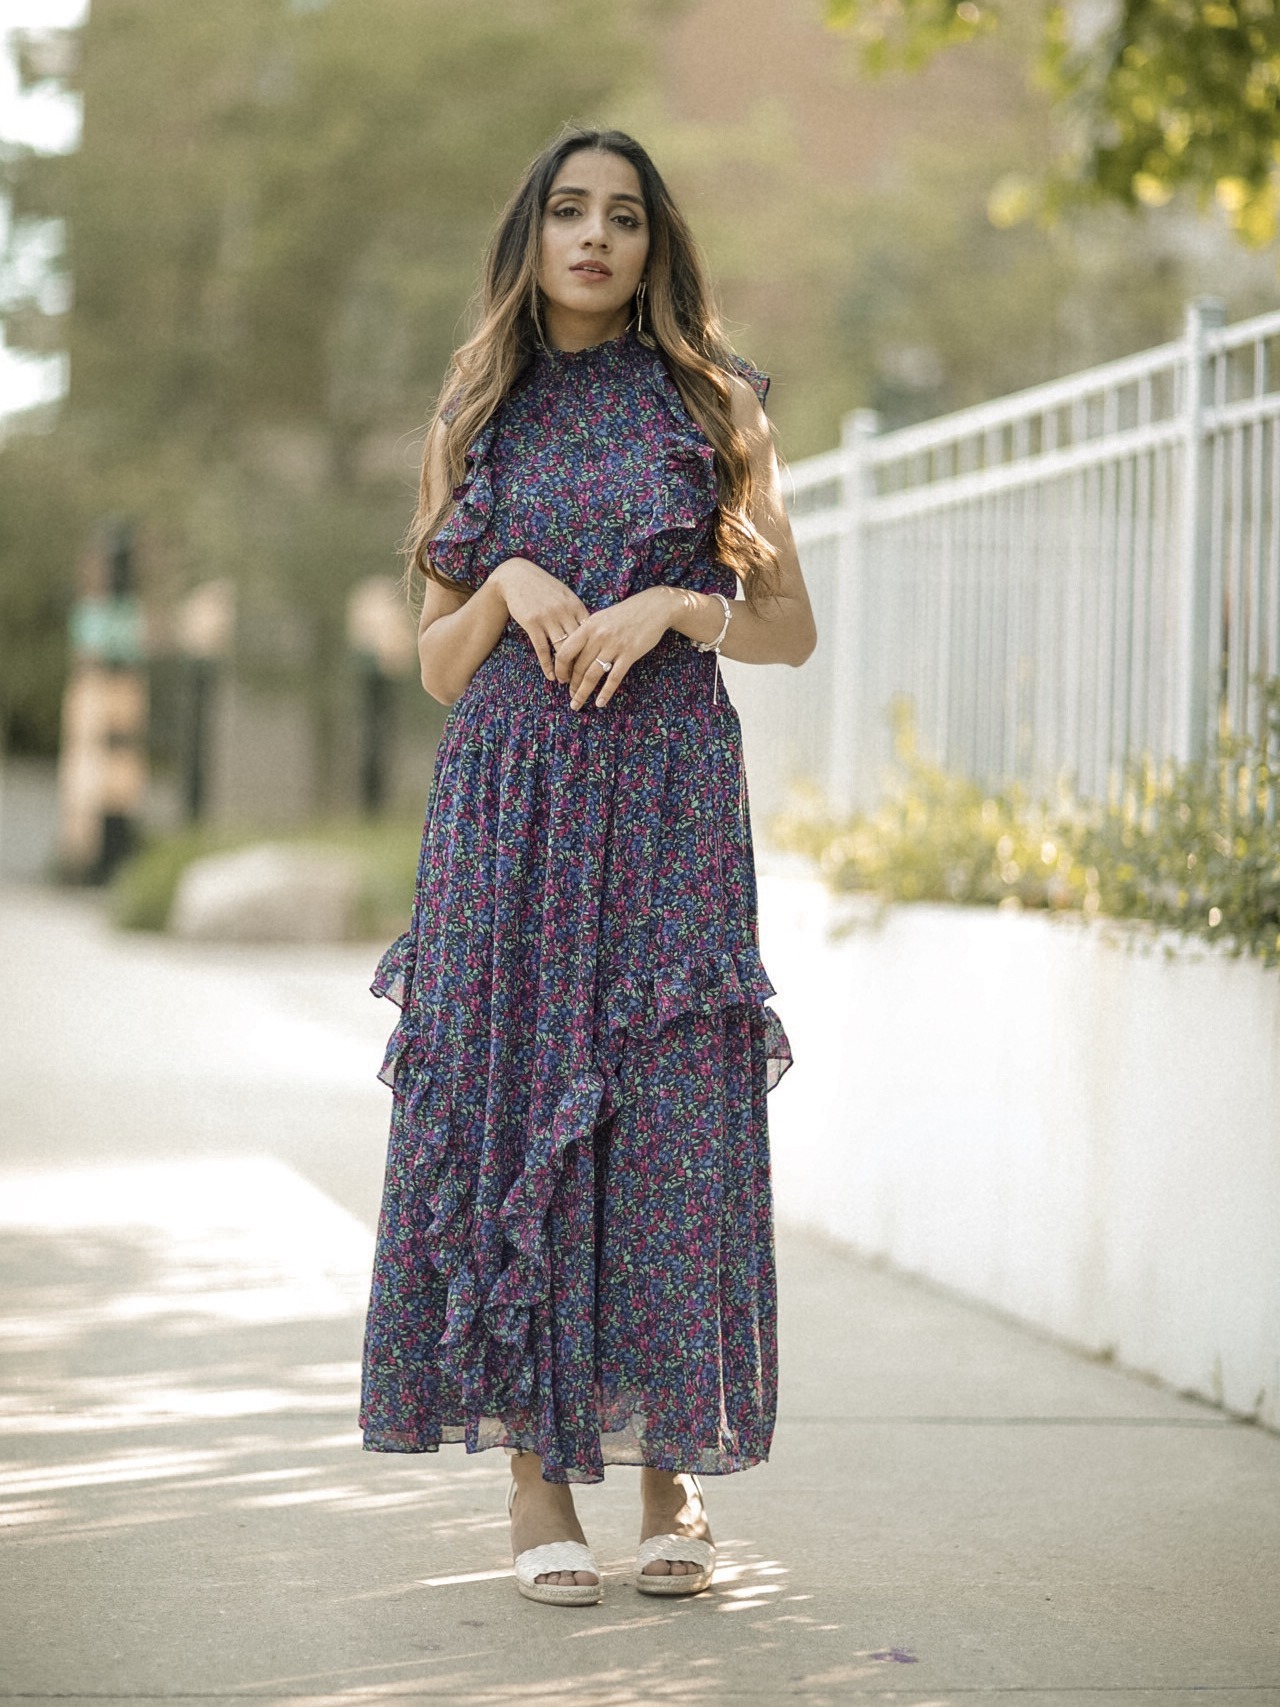 How to Dress up for a Summer Evening Look Summer Fashion Night Out Faiza Inam Sincerely Humble Blog 3